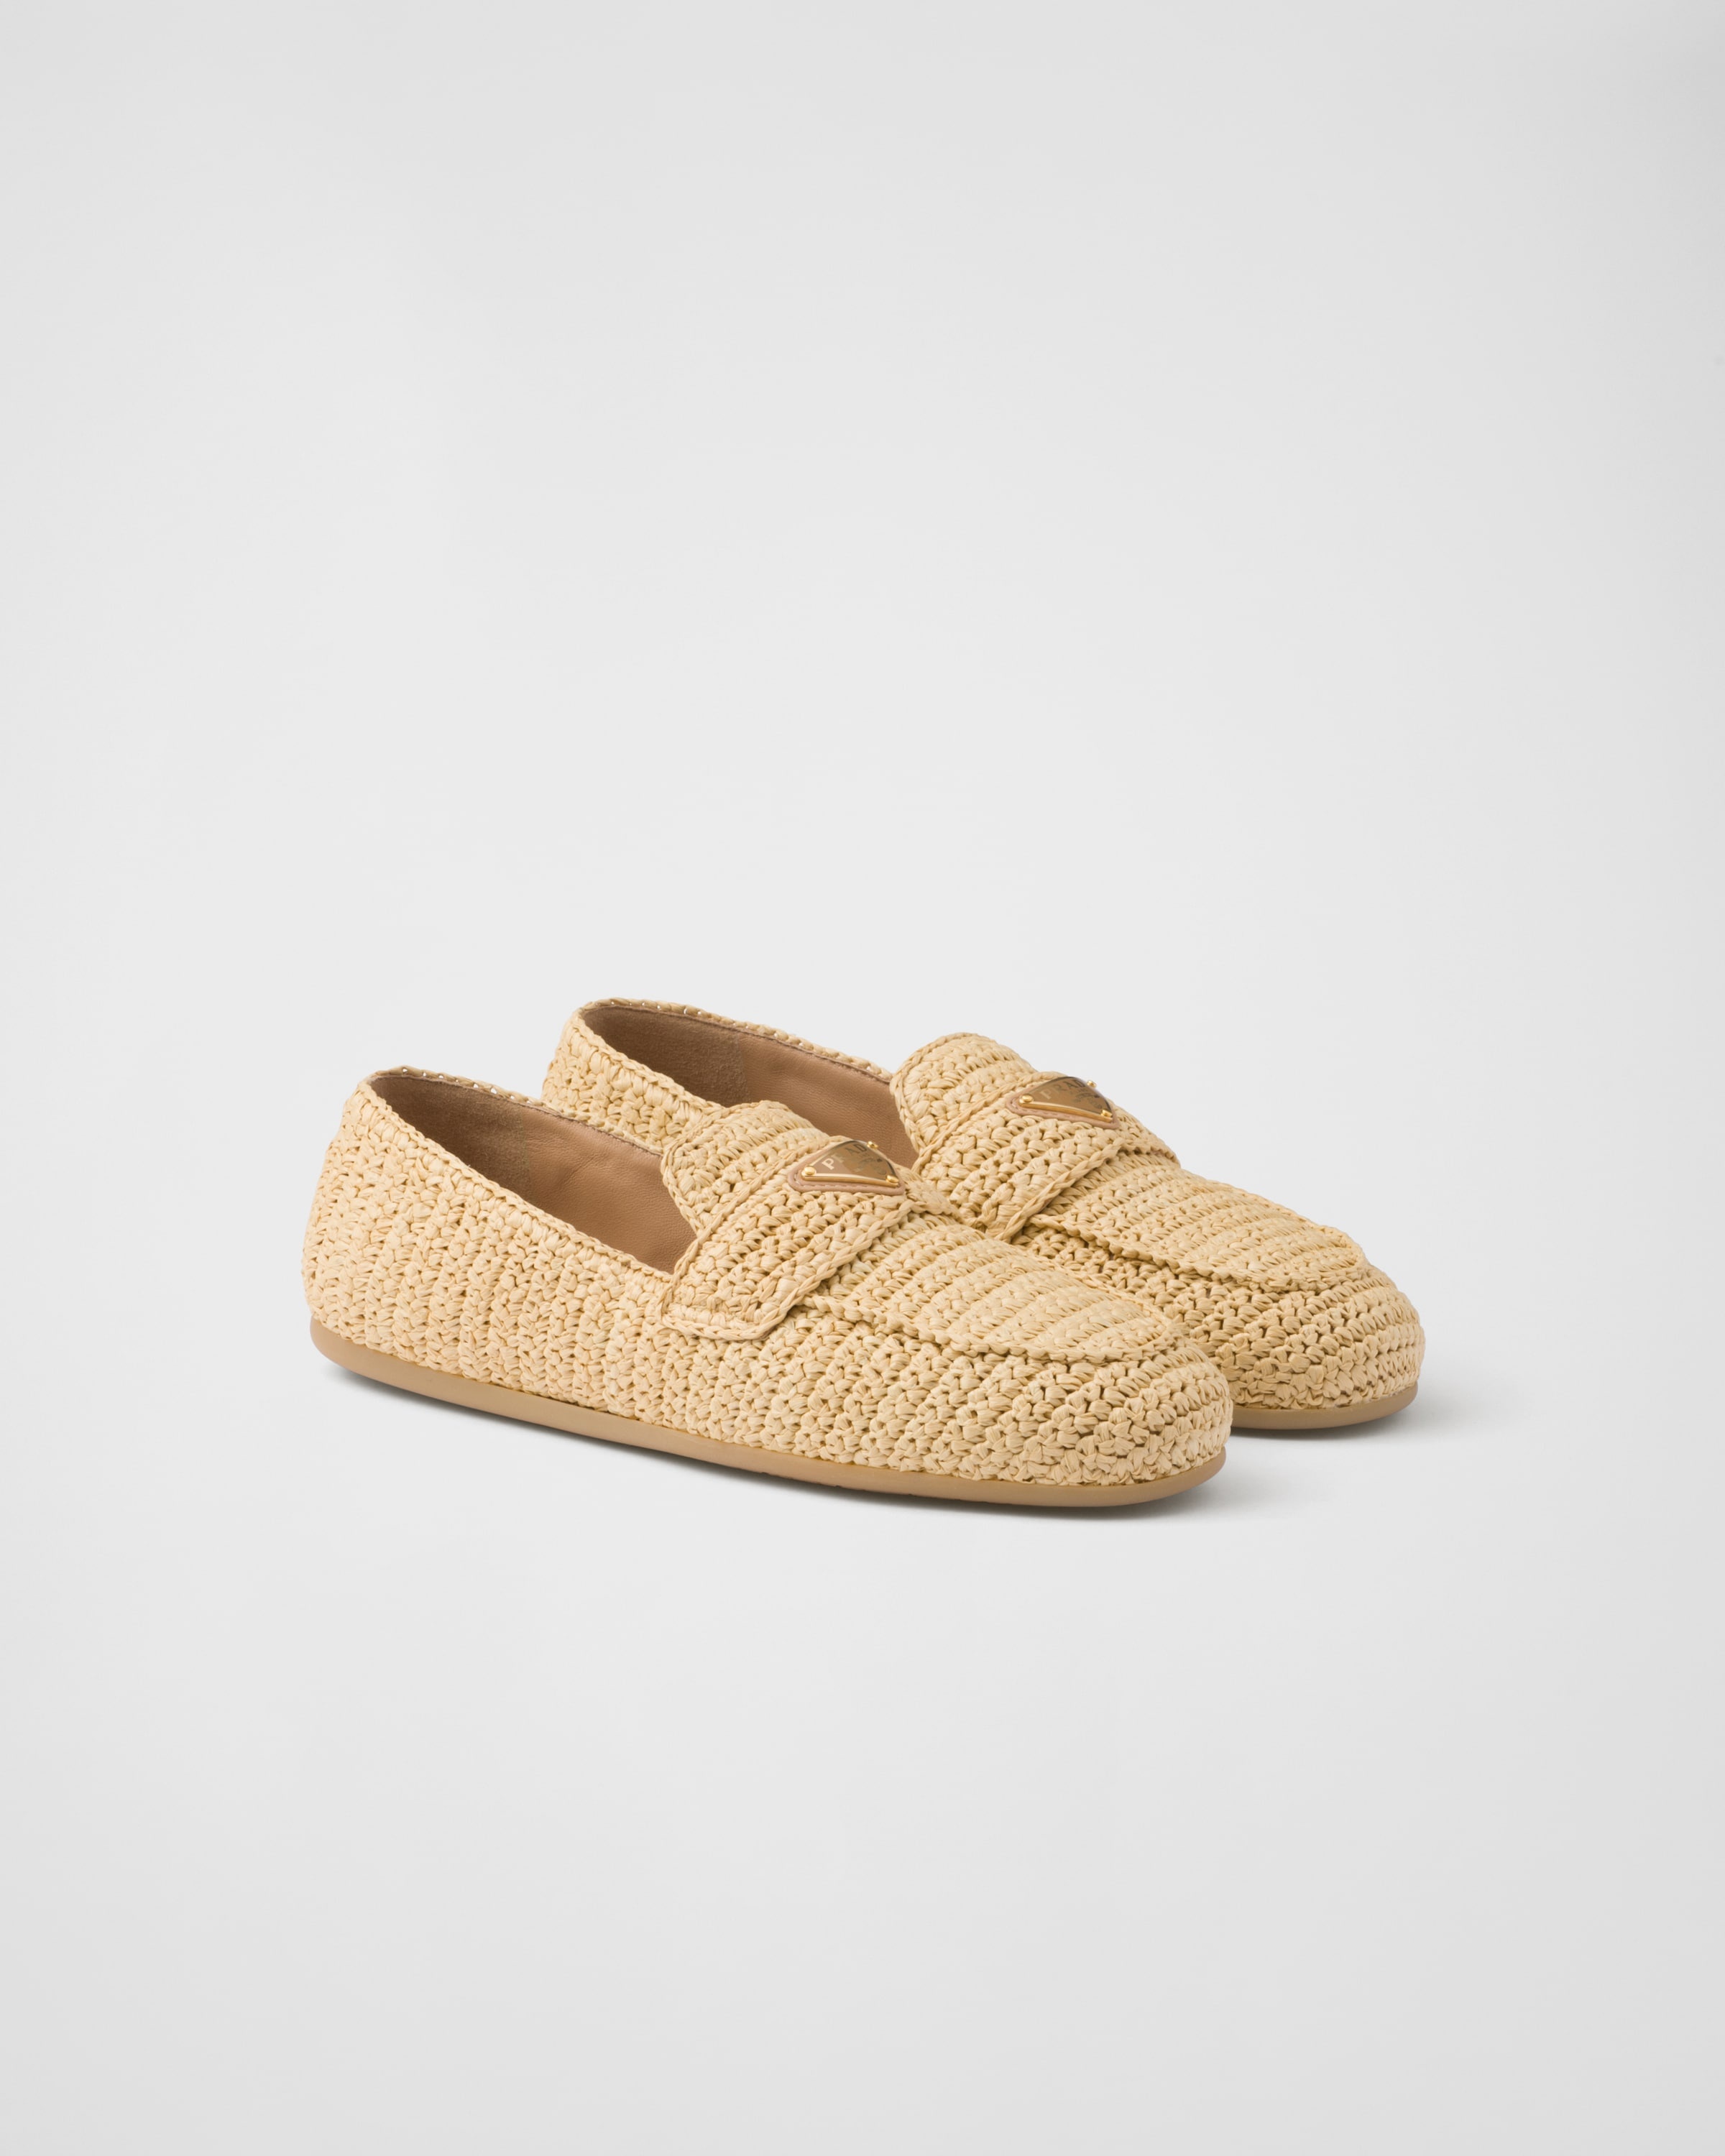 Woven fabric loafers - 1